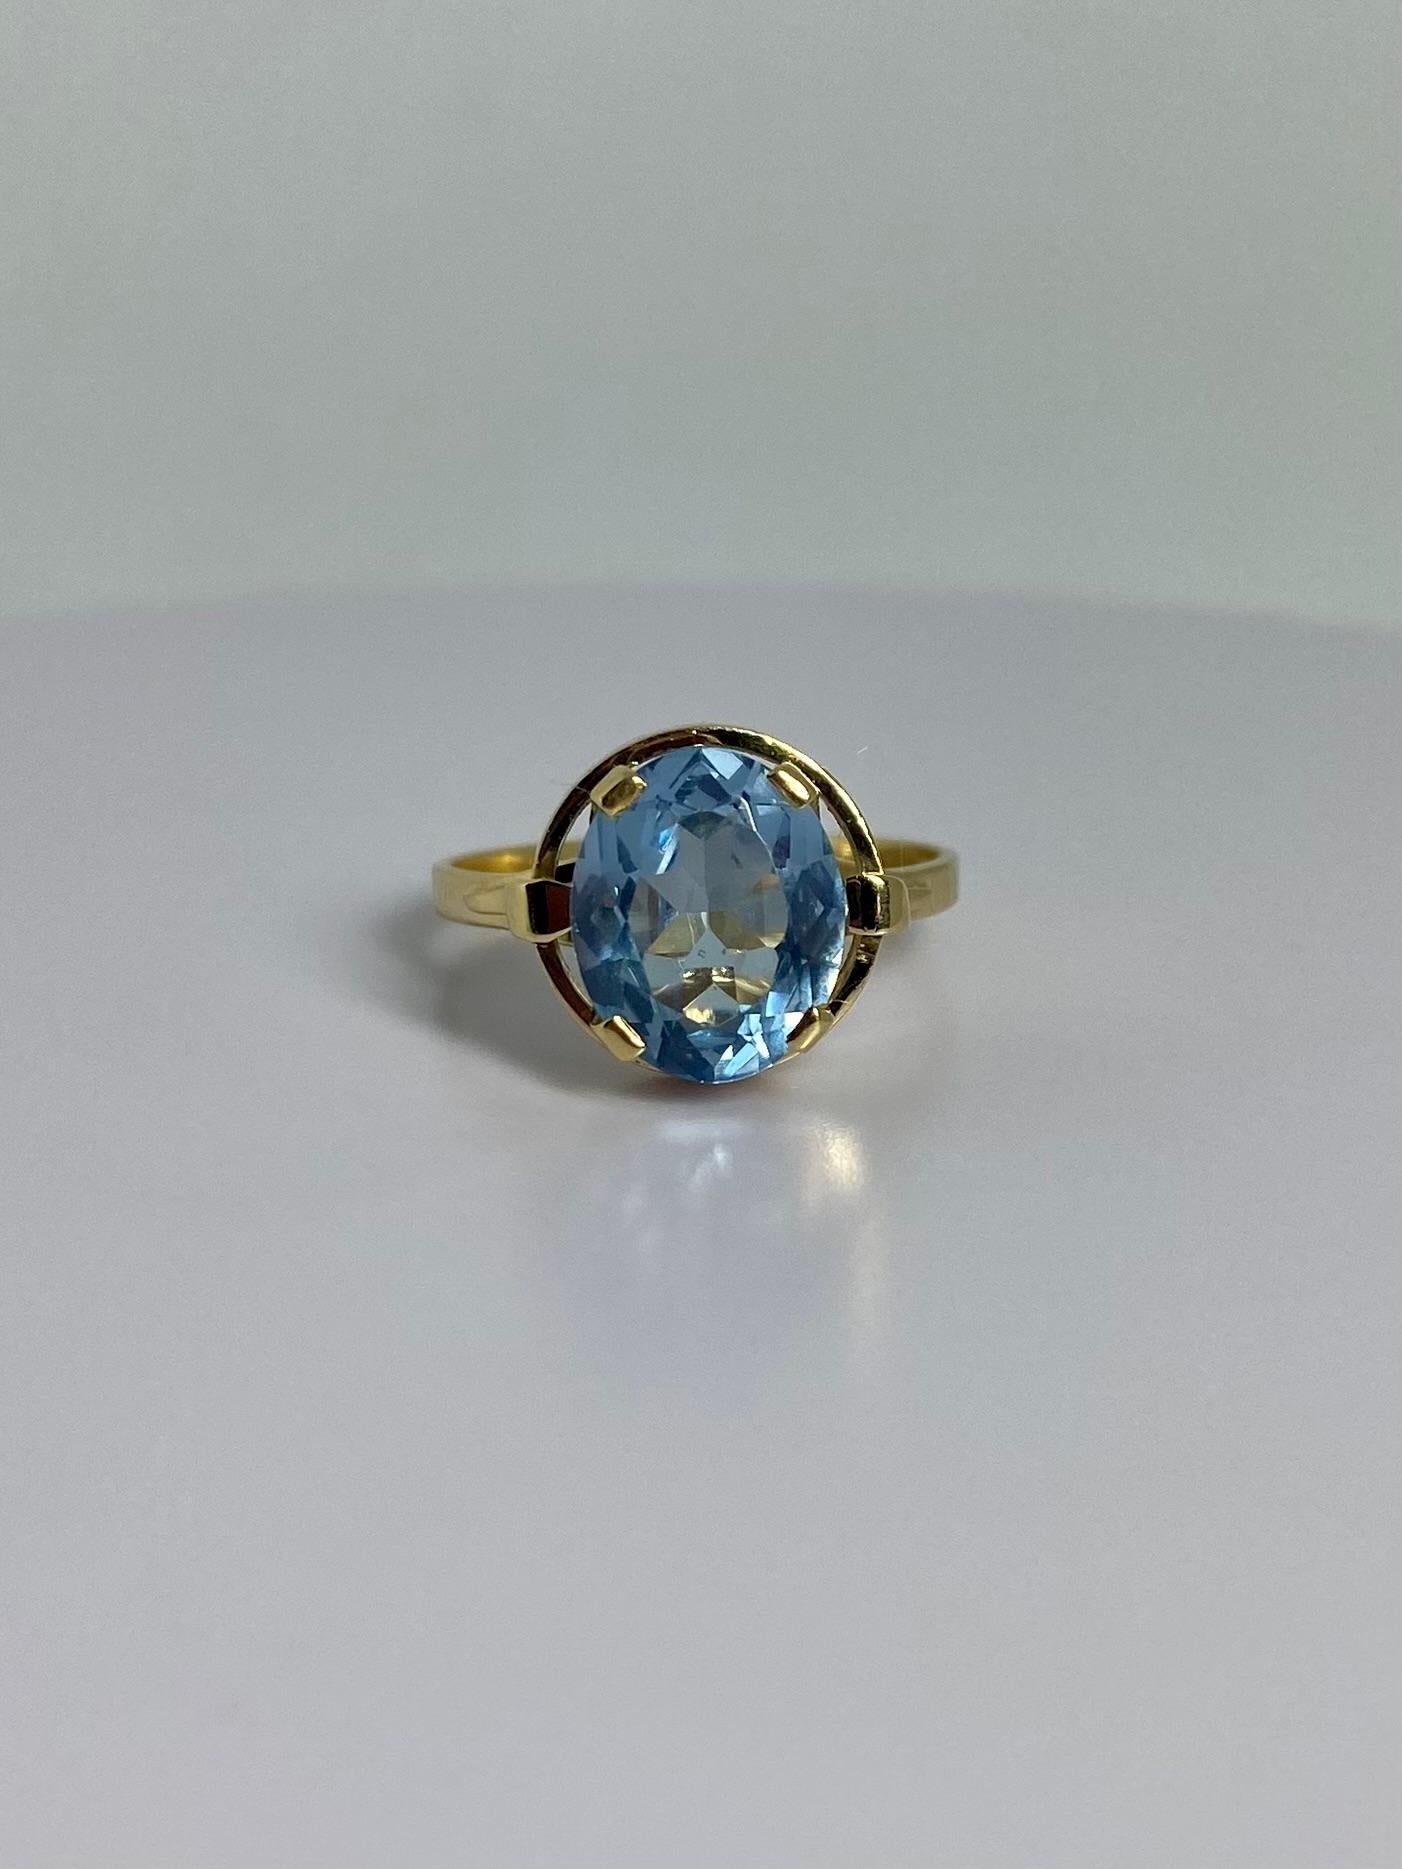 Look at this timeless design and the stunning bright blue color! This preloved jewel is made of 18 carat yellow gold and is set with a faceted round spinel of about 3.30 carat, size about 12 mm. The blue spinel is set in a chaton setting. 

This